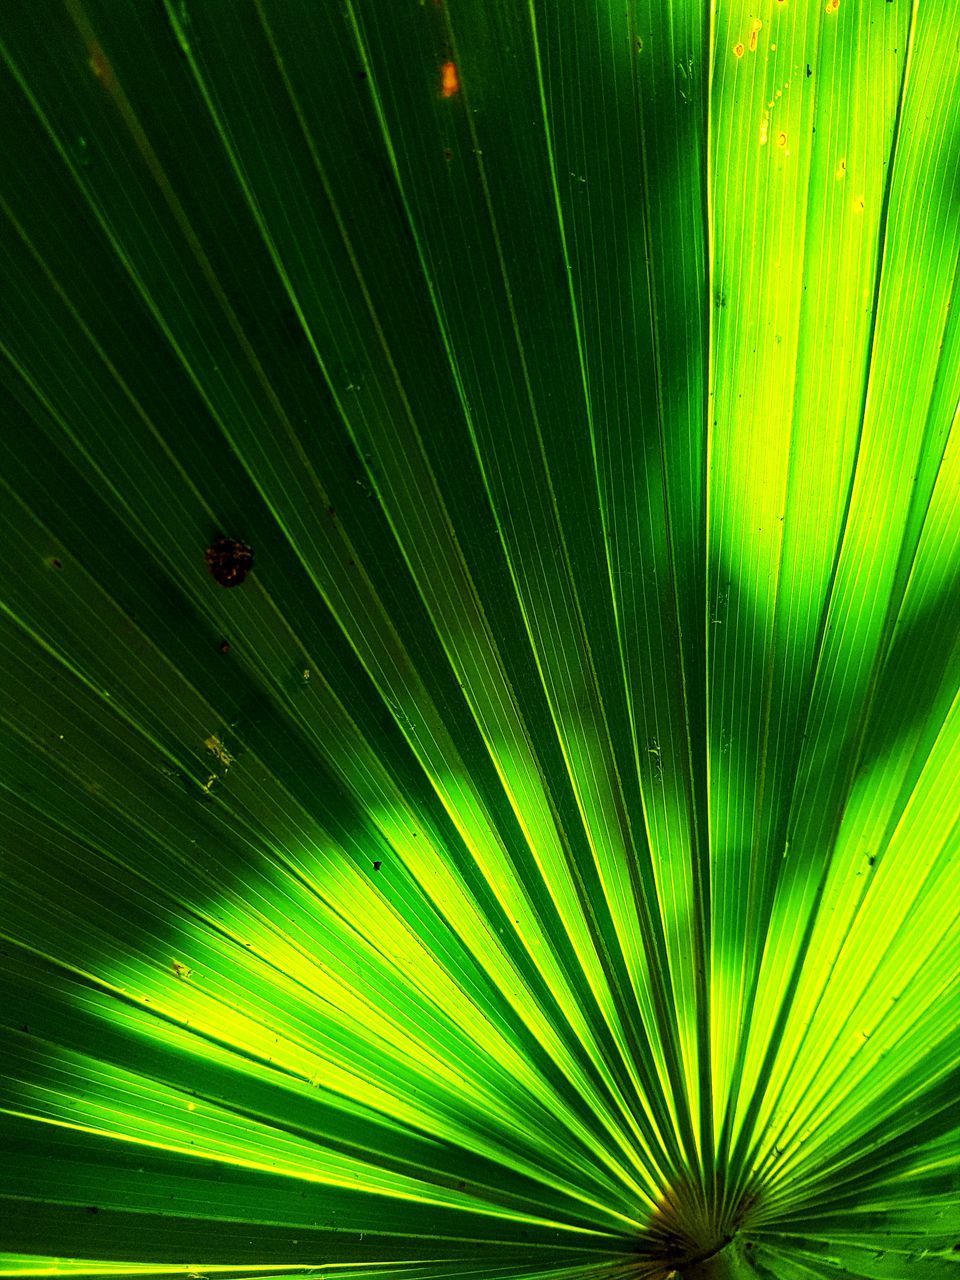 CLOSE-UP OF PALM LEAF ON GREEN LEAVES